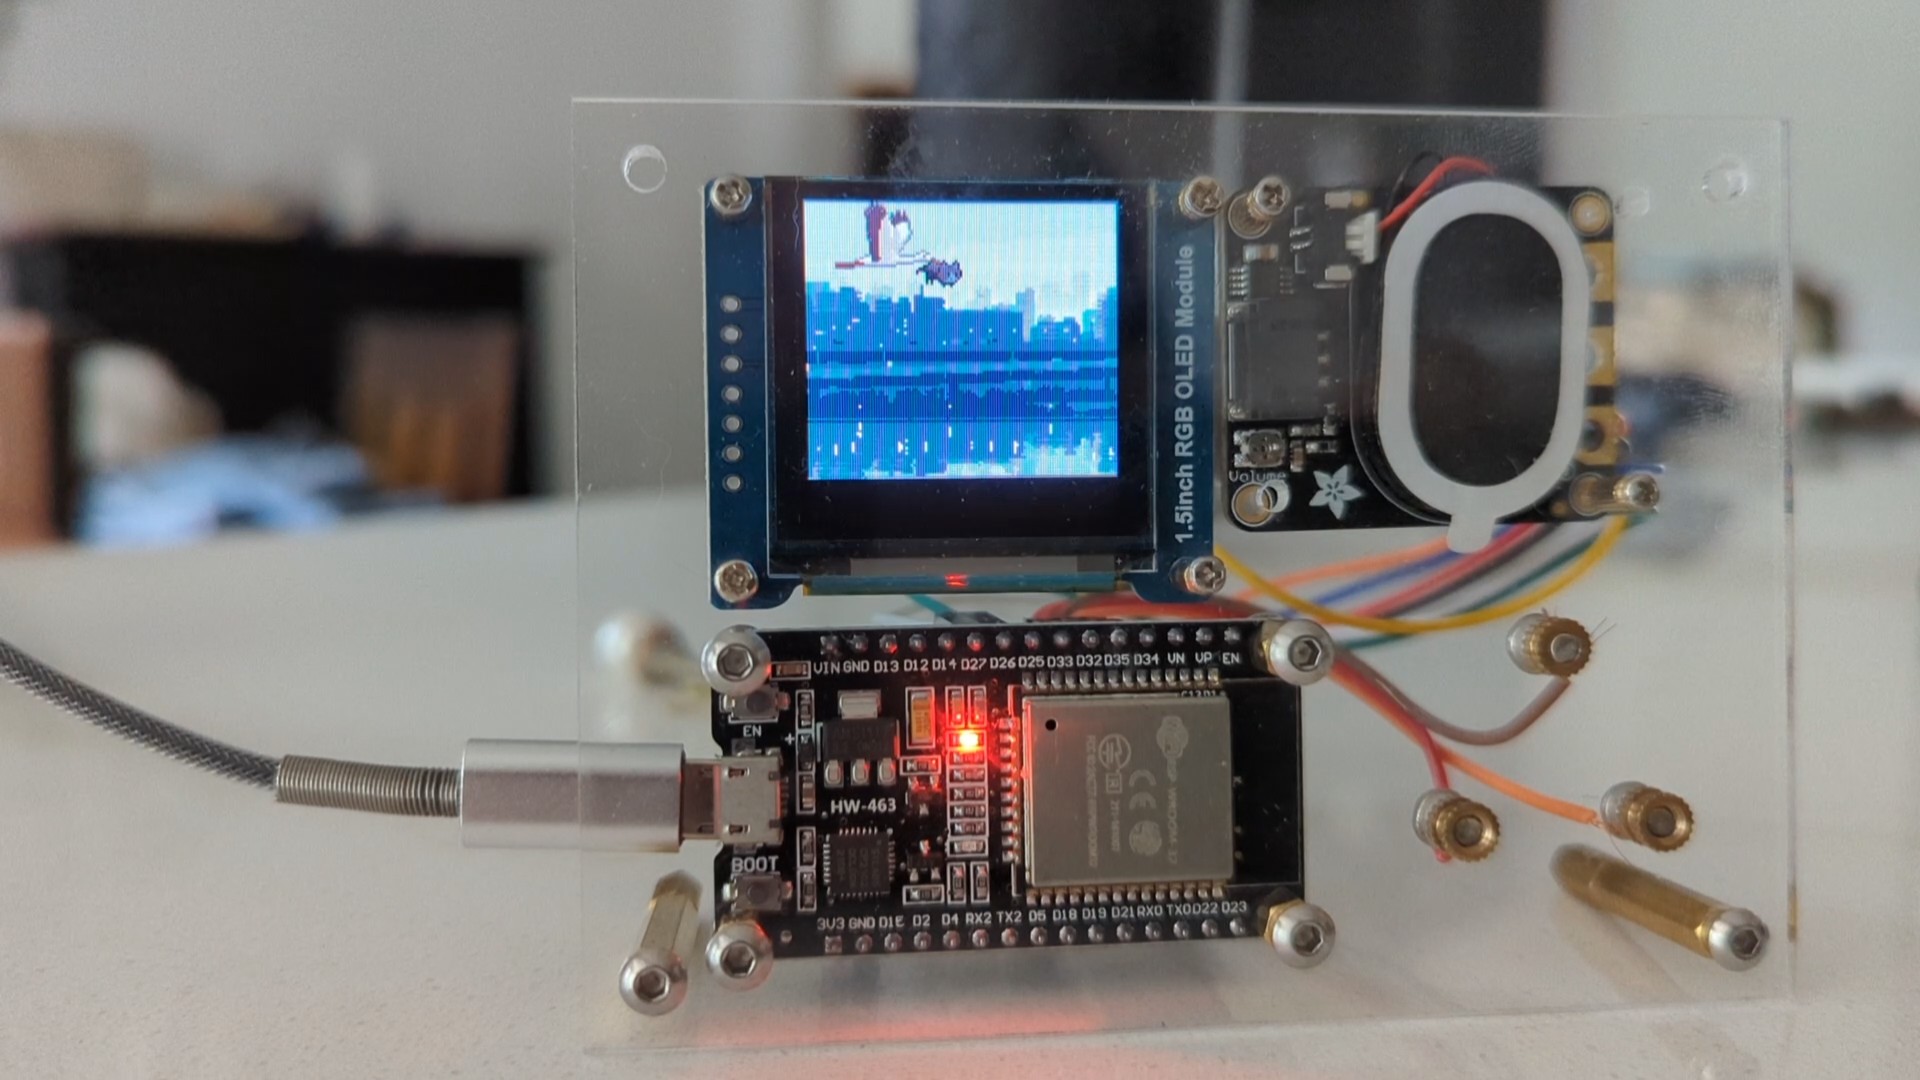 ESP32: leaving love notes and entering demoscene territory